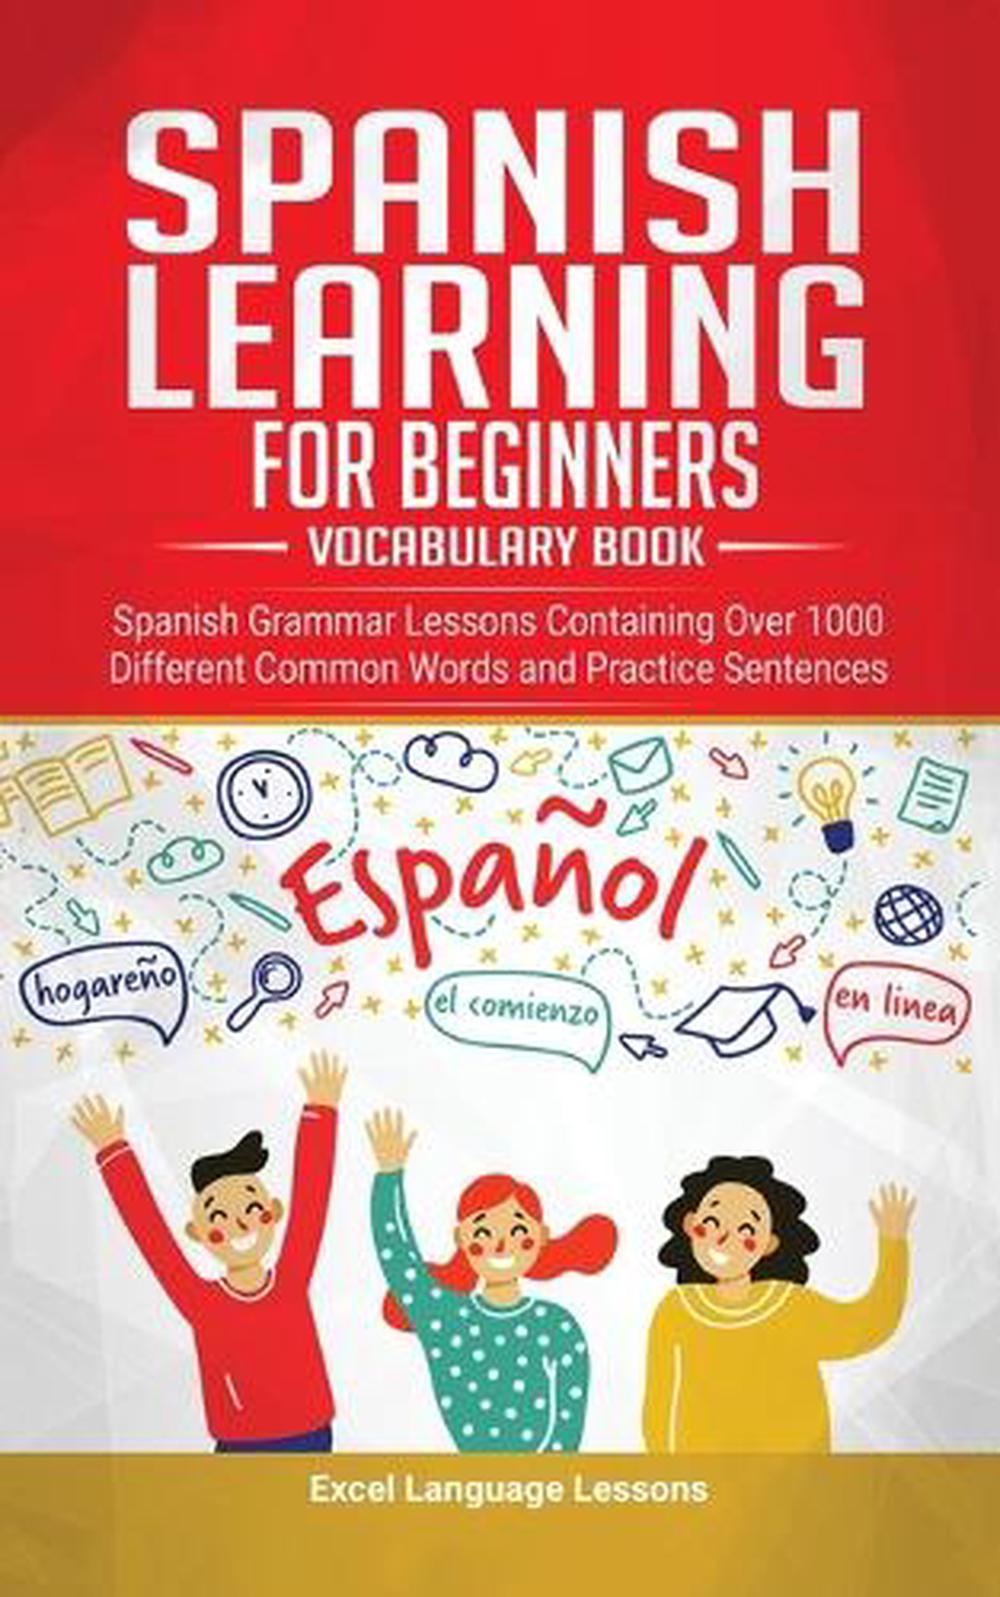 read-a-book-in-spanish-to-learn-learn-to-read-and-write-the-vowels-in